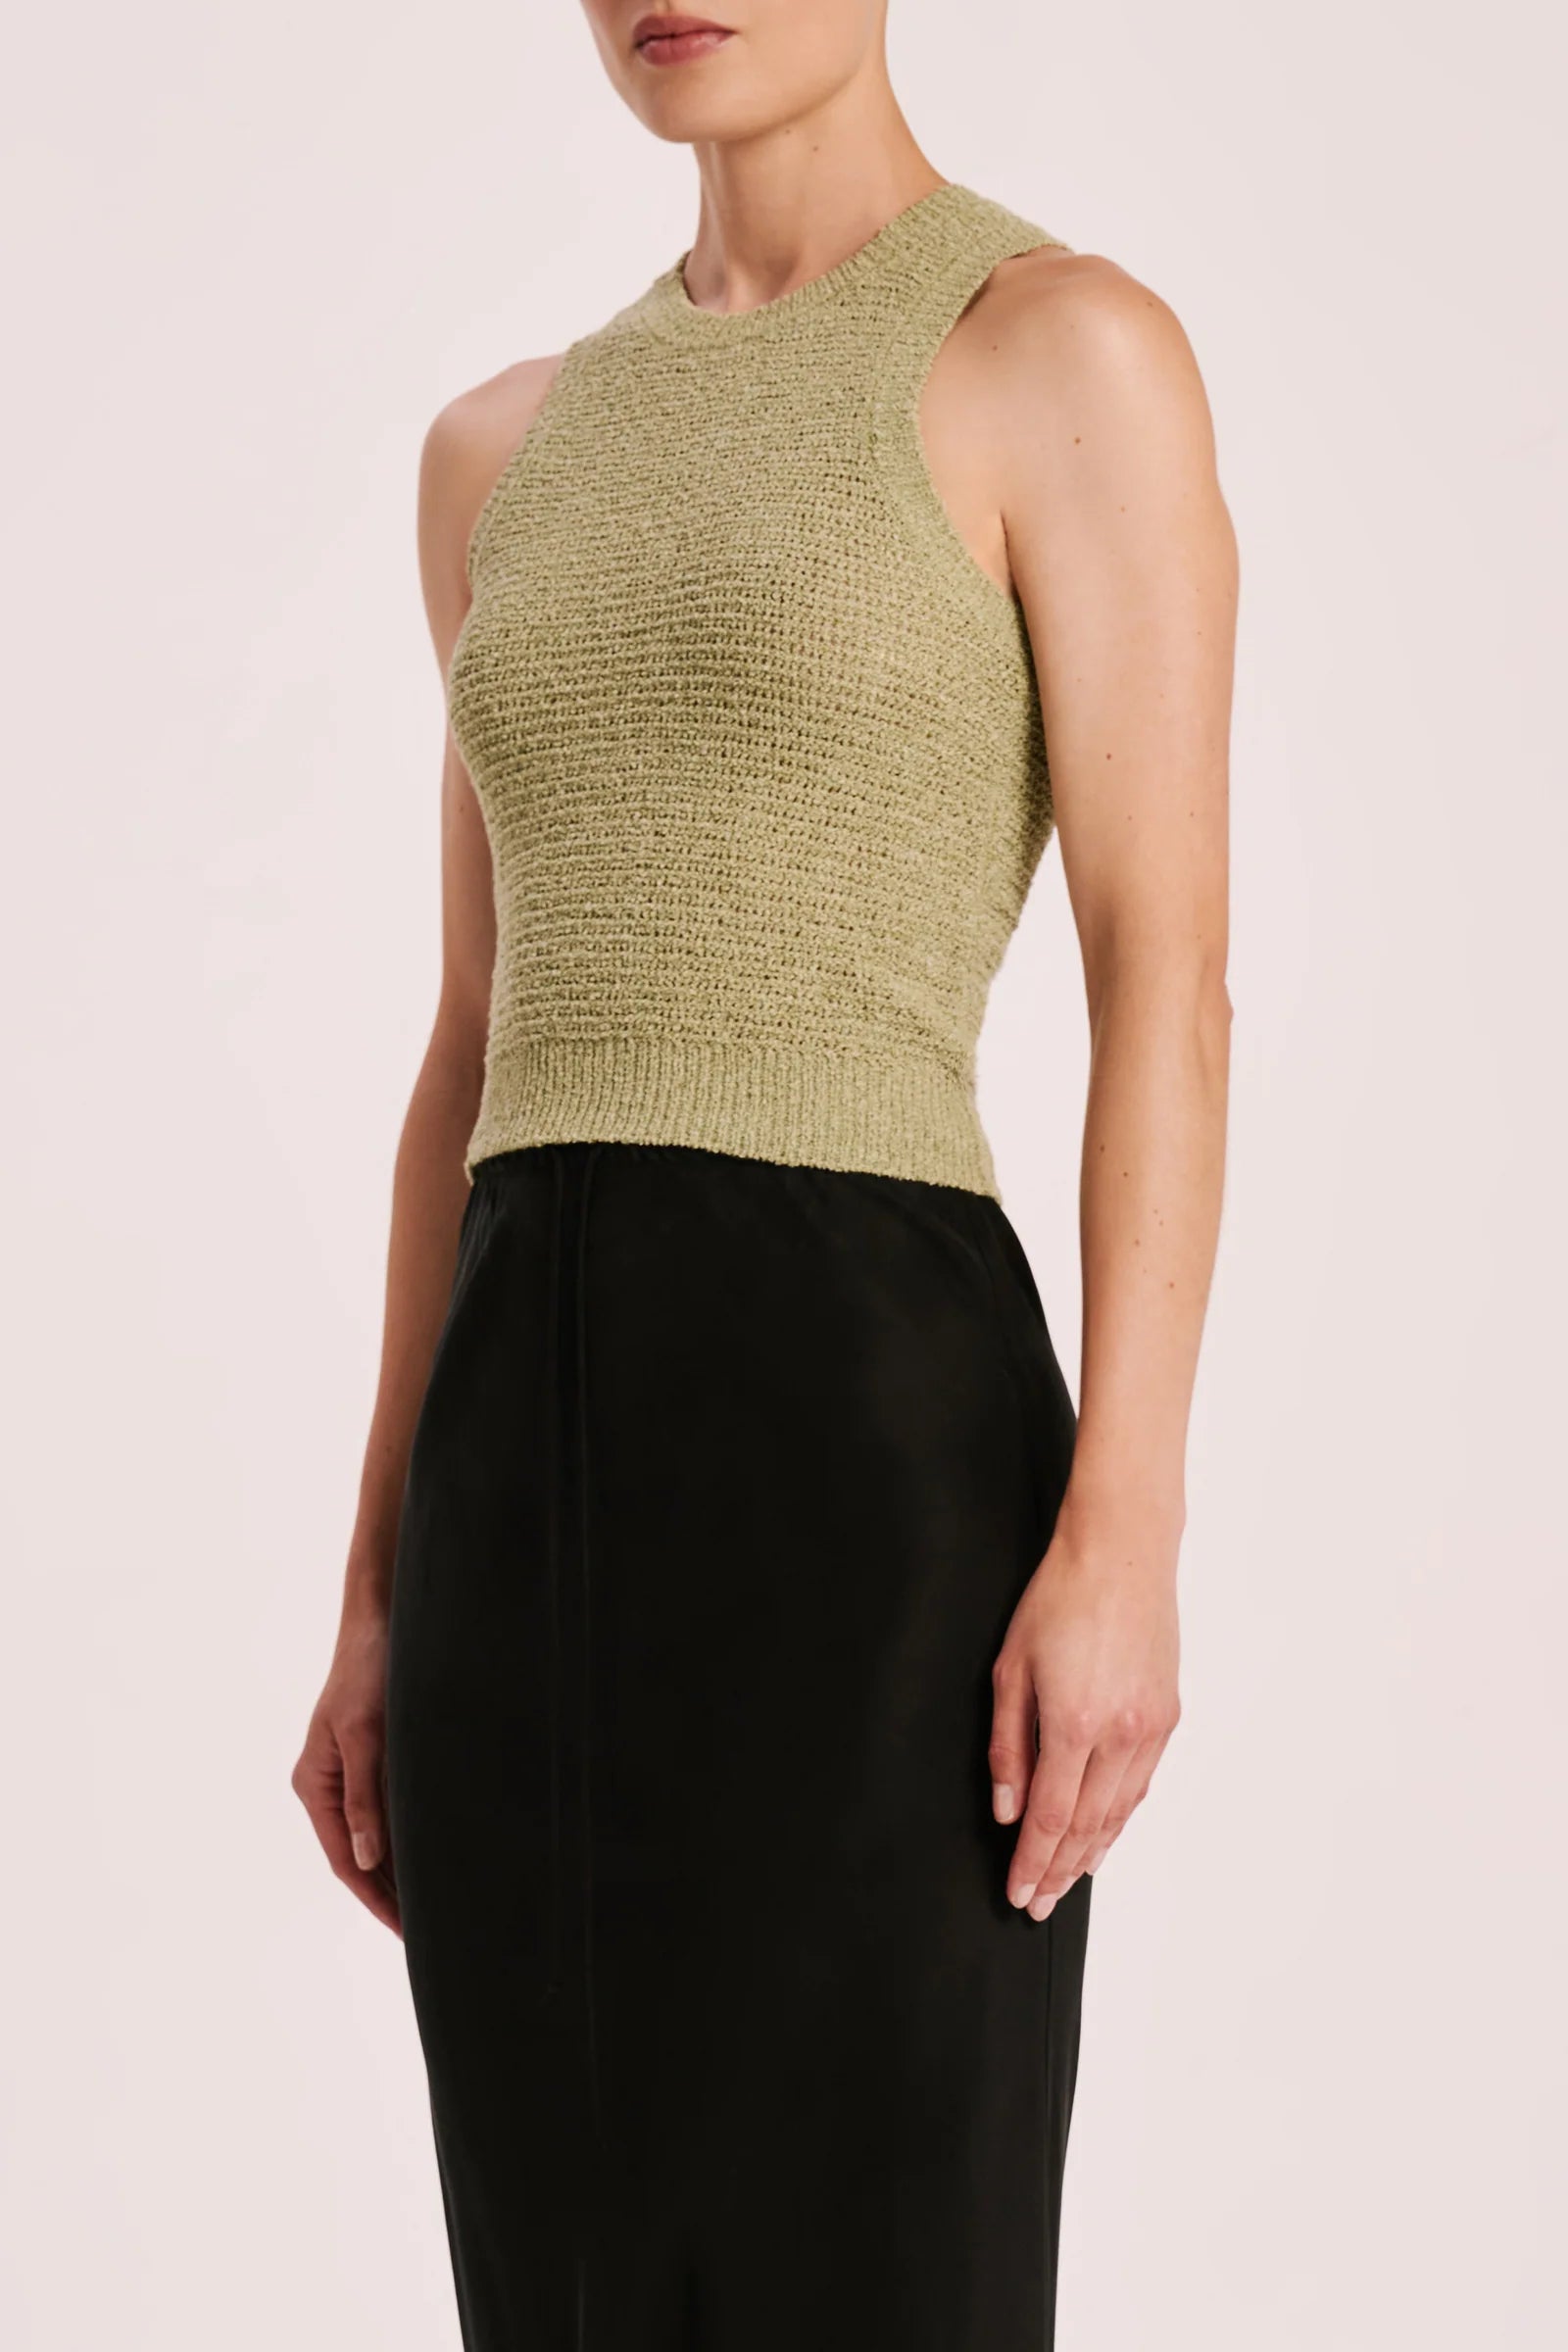 Nude Lucy | Ember Knit Tank - Lime